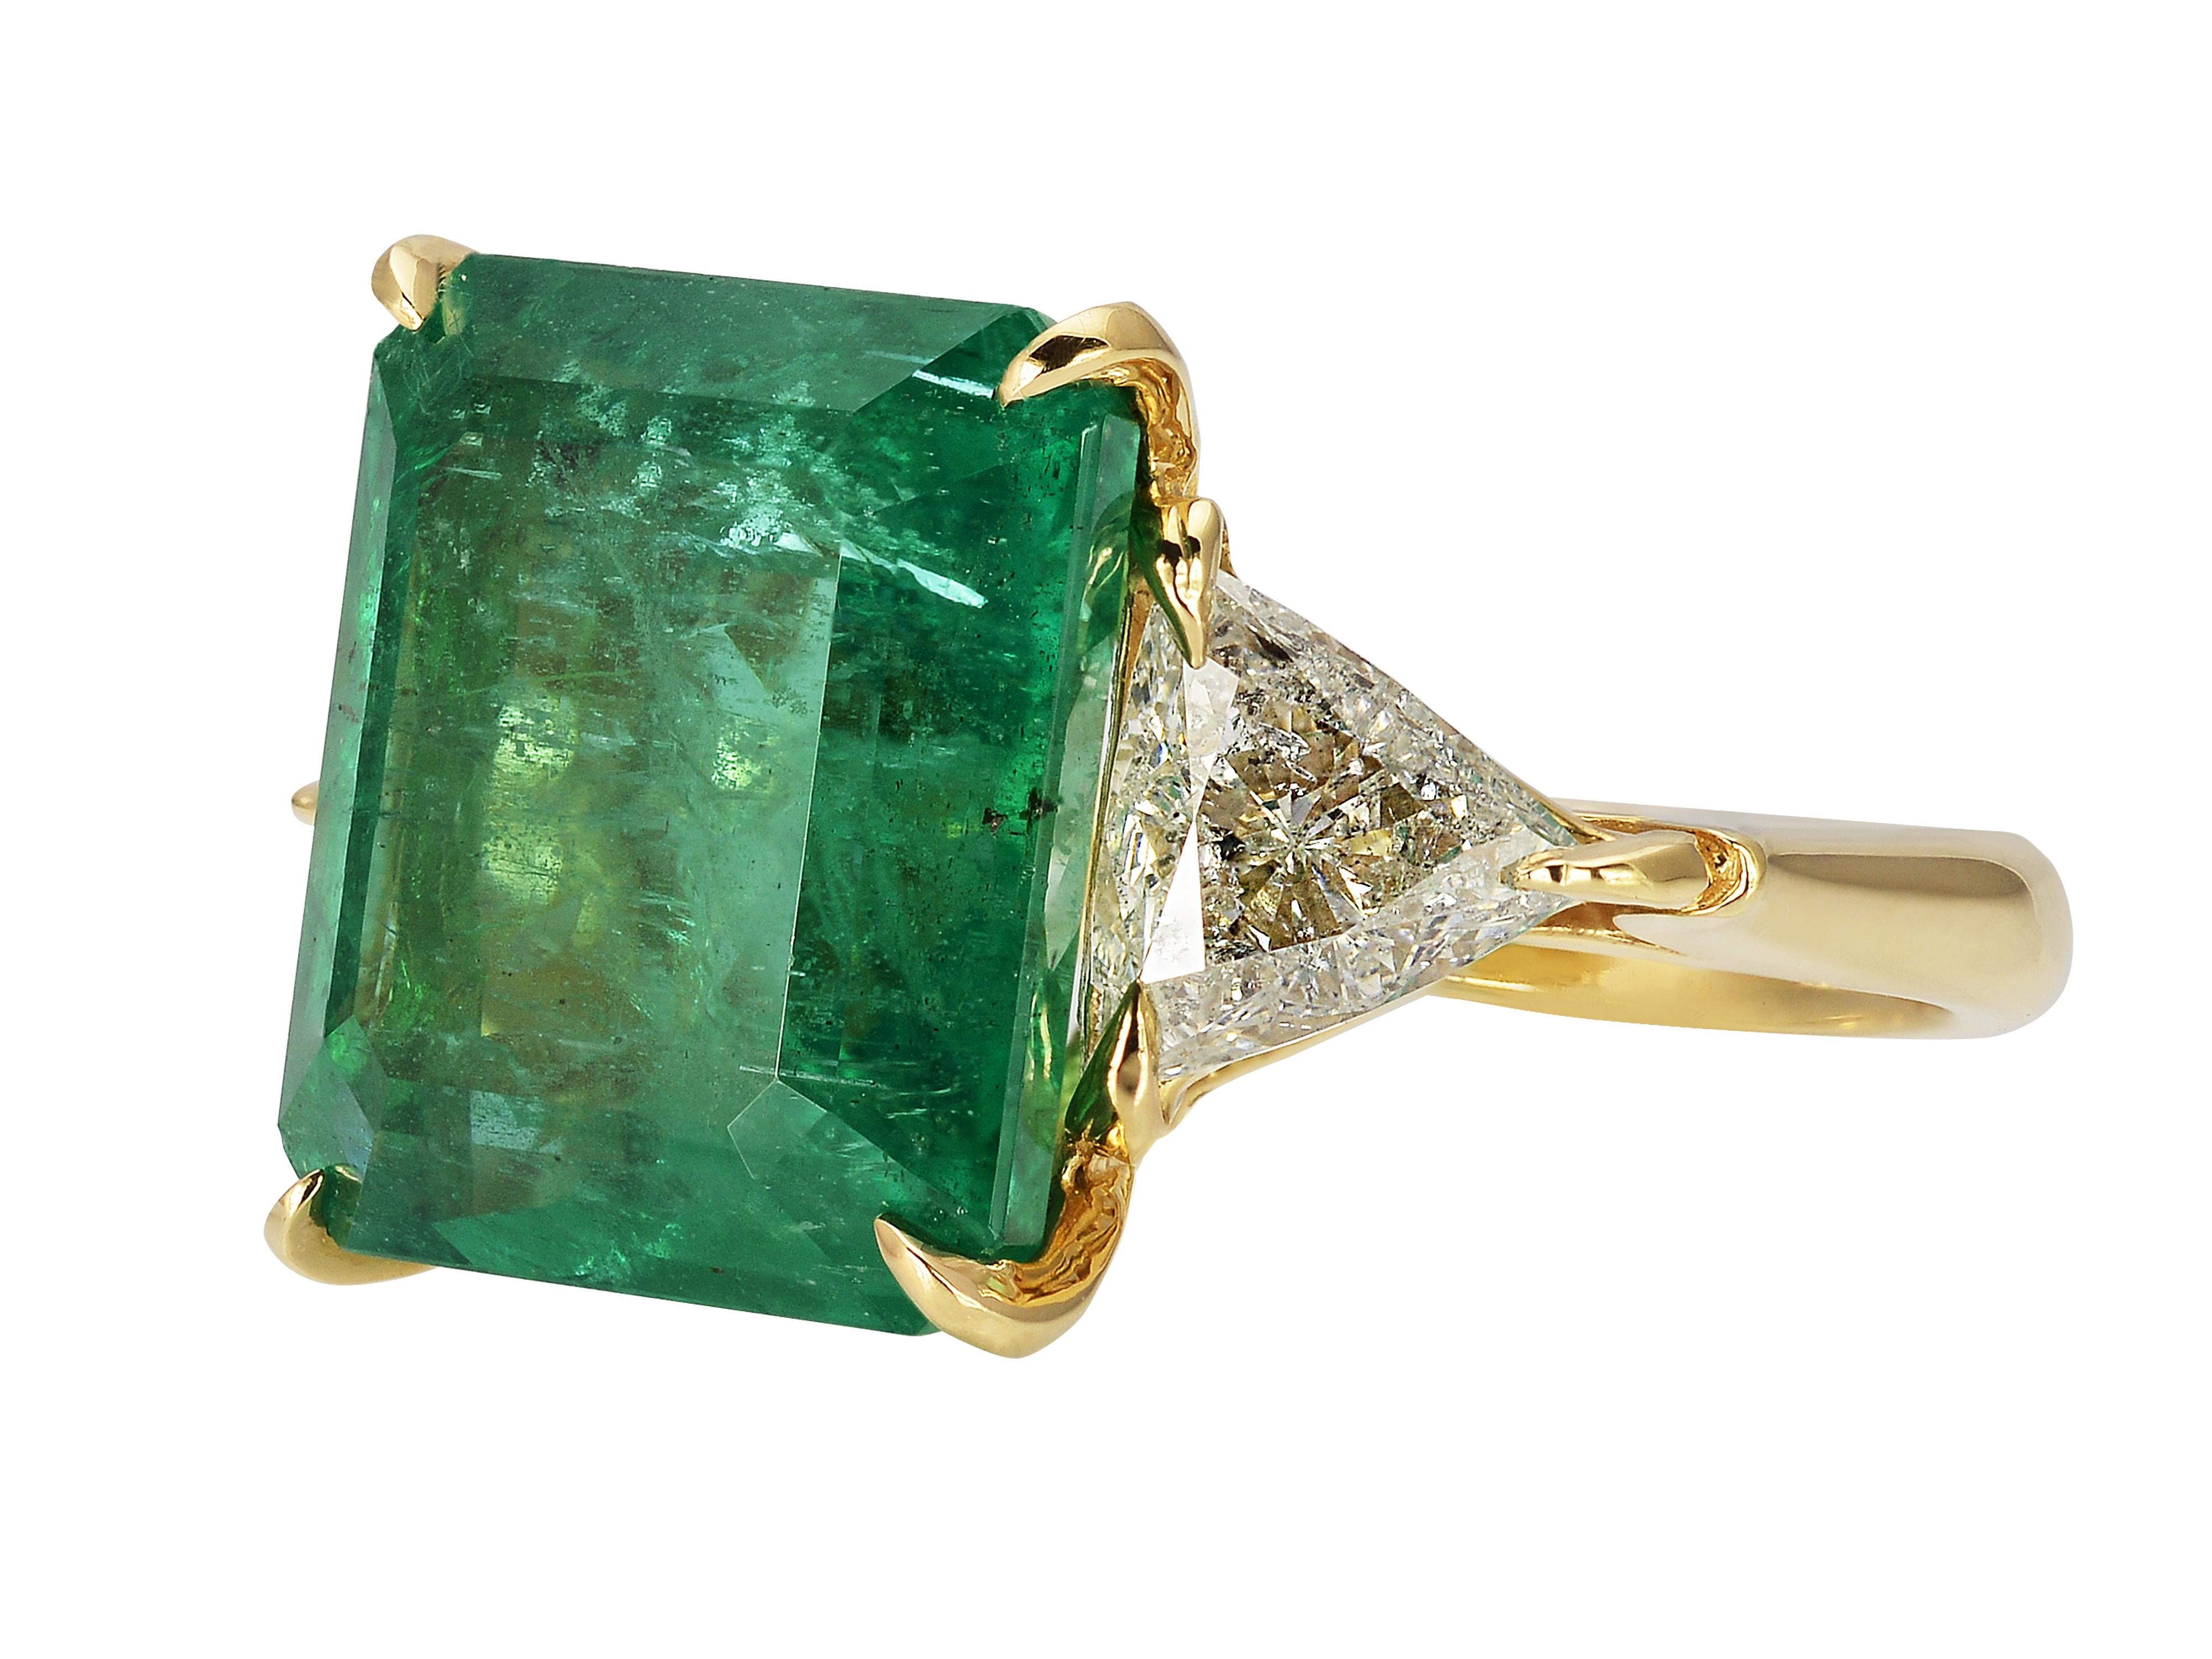 18 Karat Yellow Gold Three Stone Cocktail Ring Featuring A 10 Carat Emerald GIA Graded As Zambian In Origin. Two Trilliant Cut Side Diamonds Total 1.40 Carats Of I1 Clarity & H Color. Hidden Hearts in Gallery. Finger Size 6; Purchase Includes One